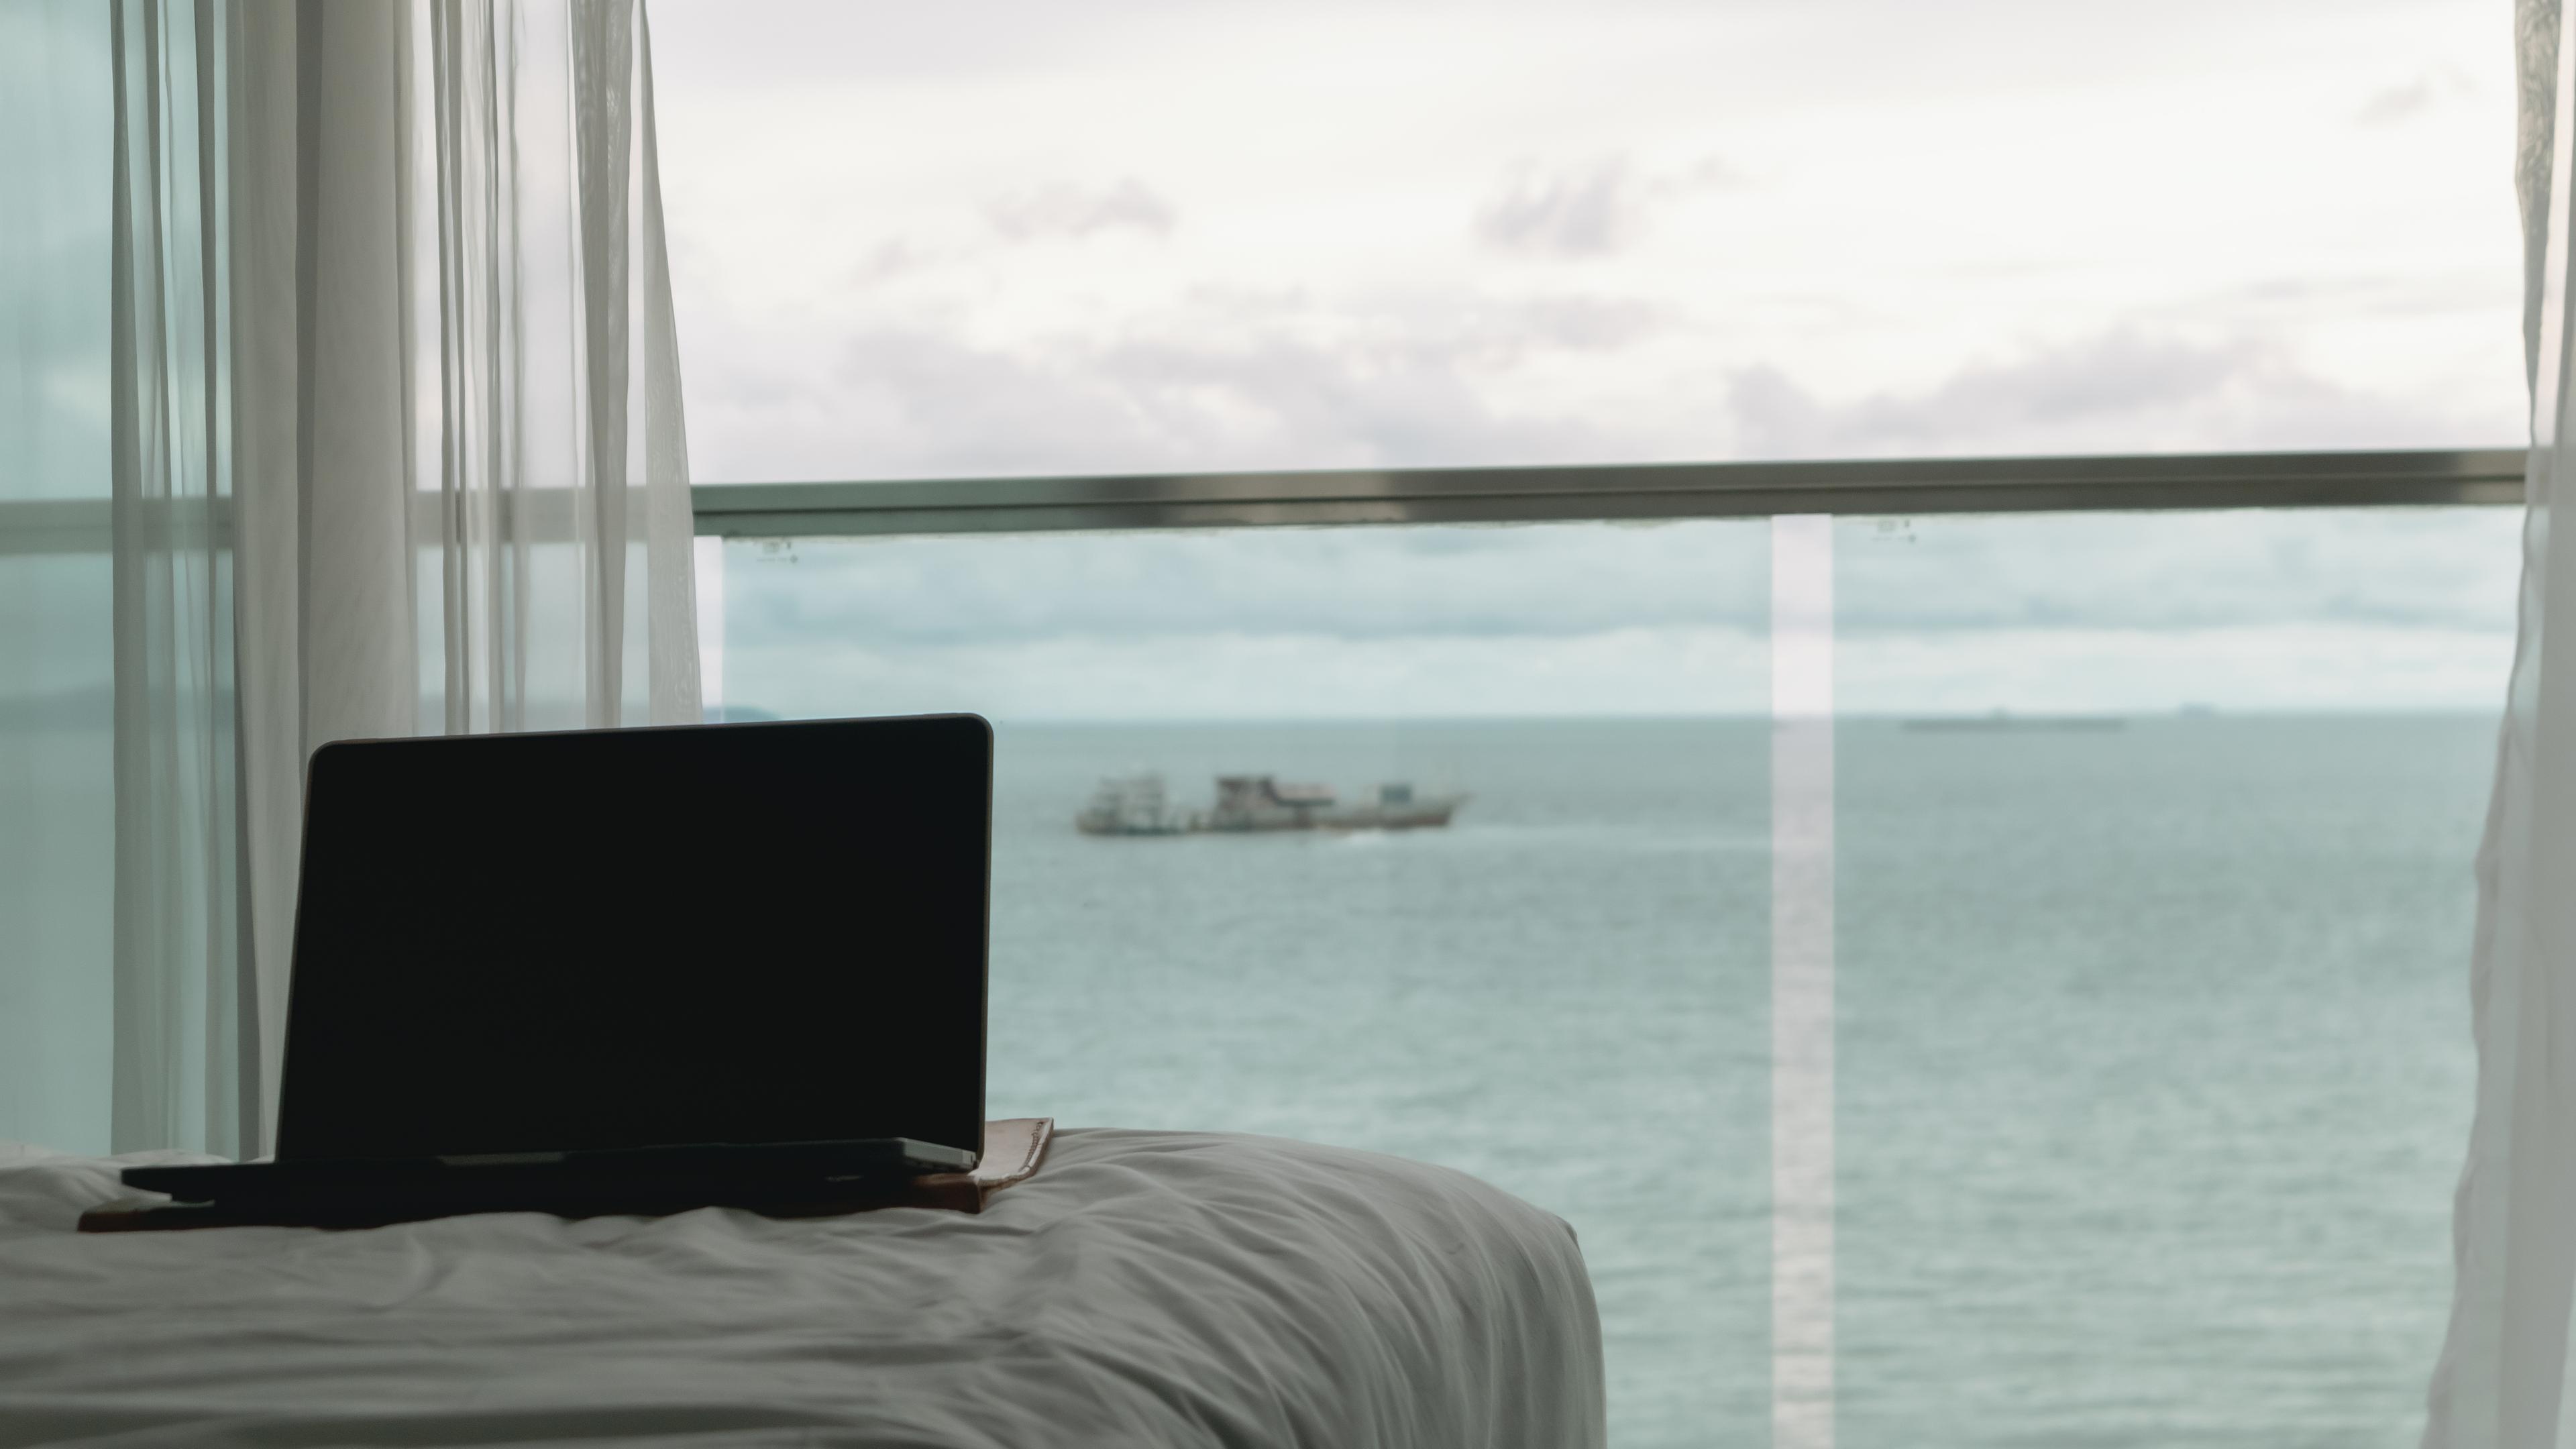 Empty screen laptop on bed with ocean view balcony